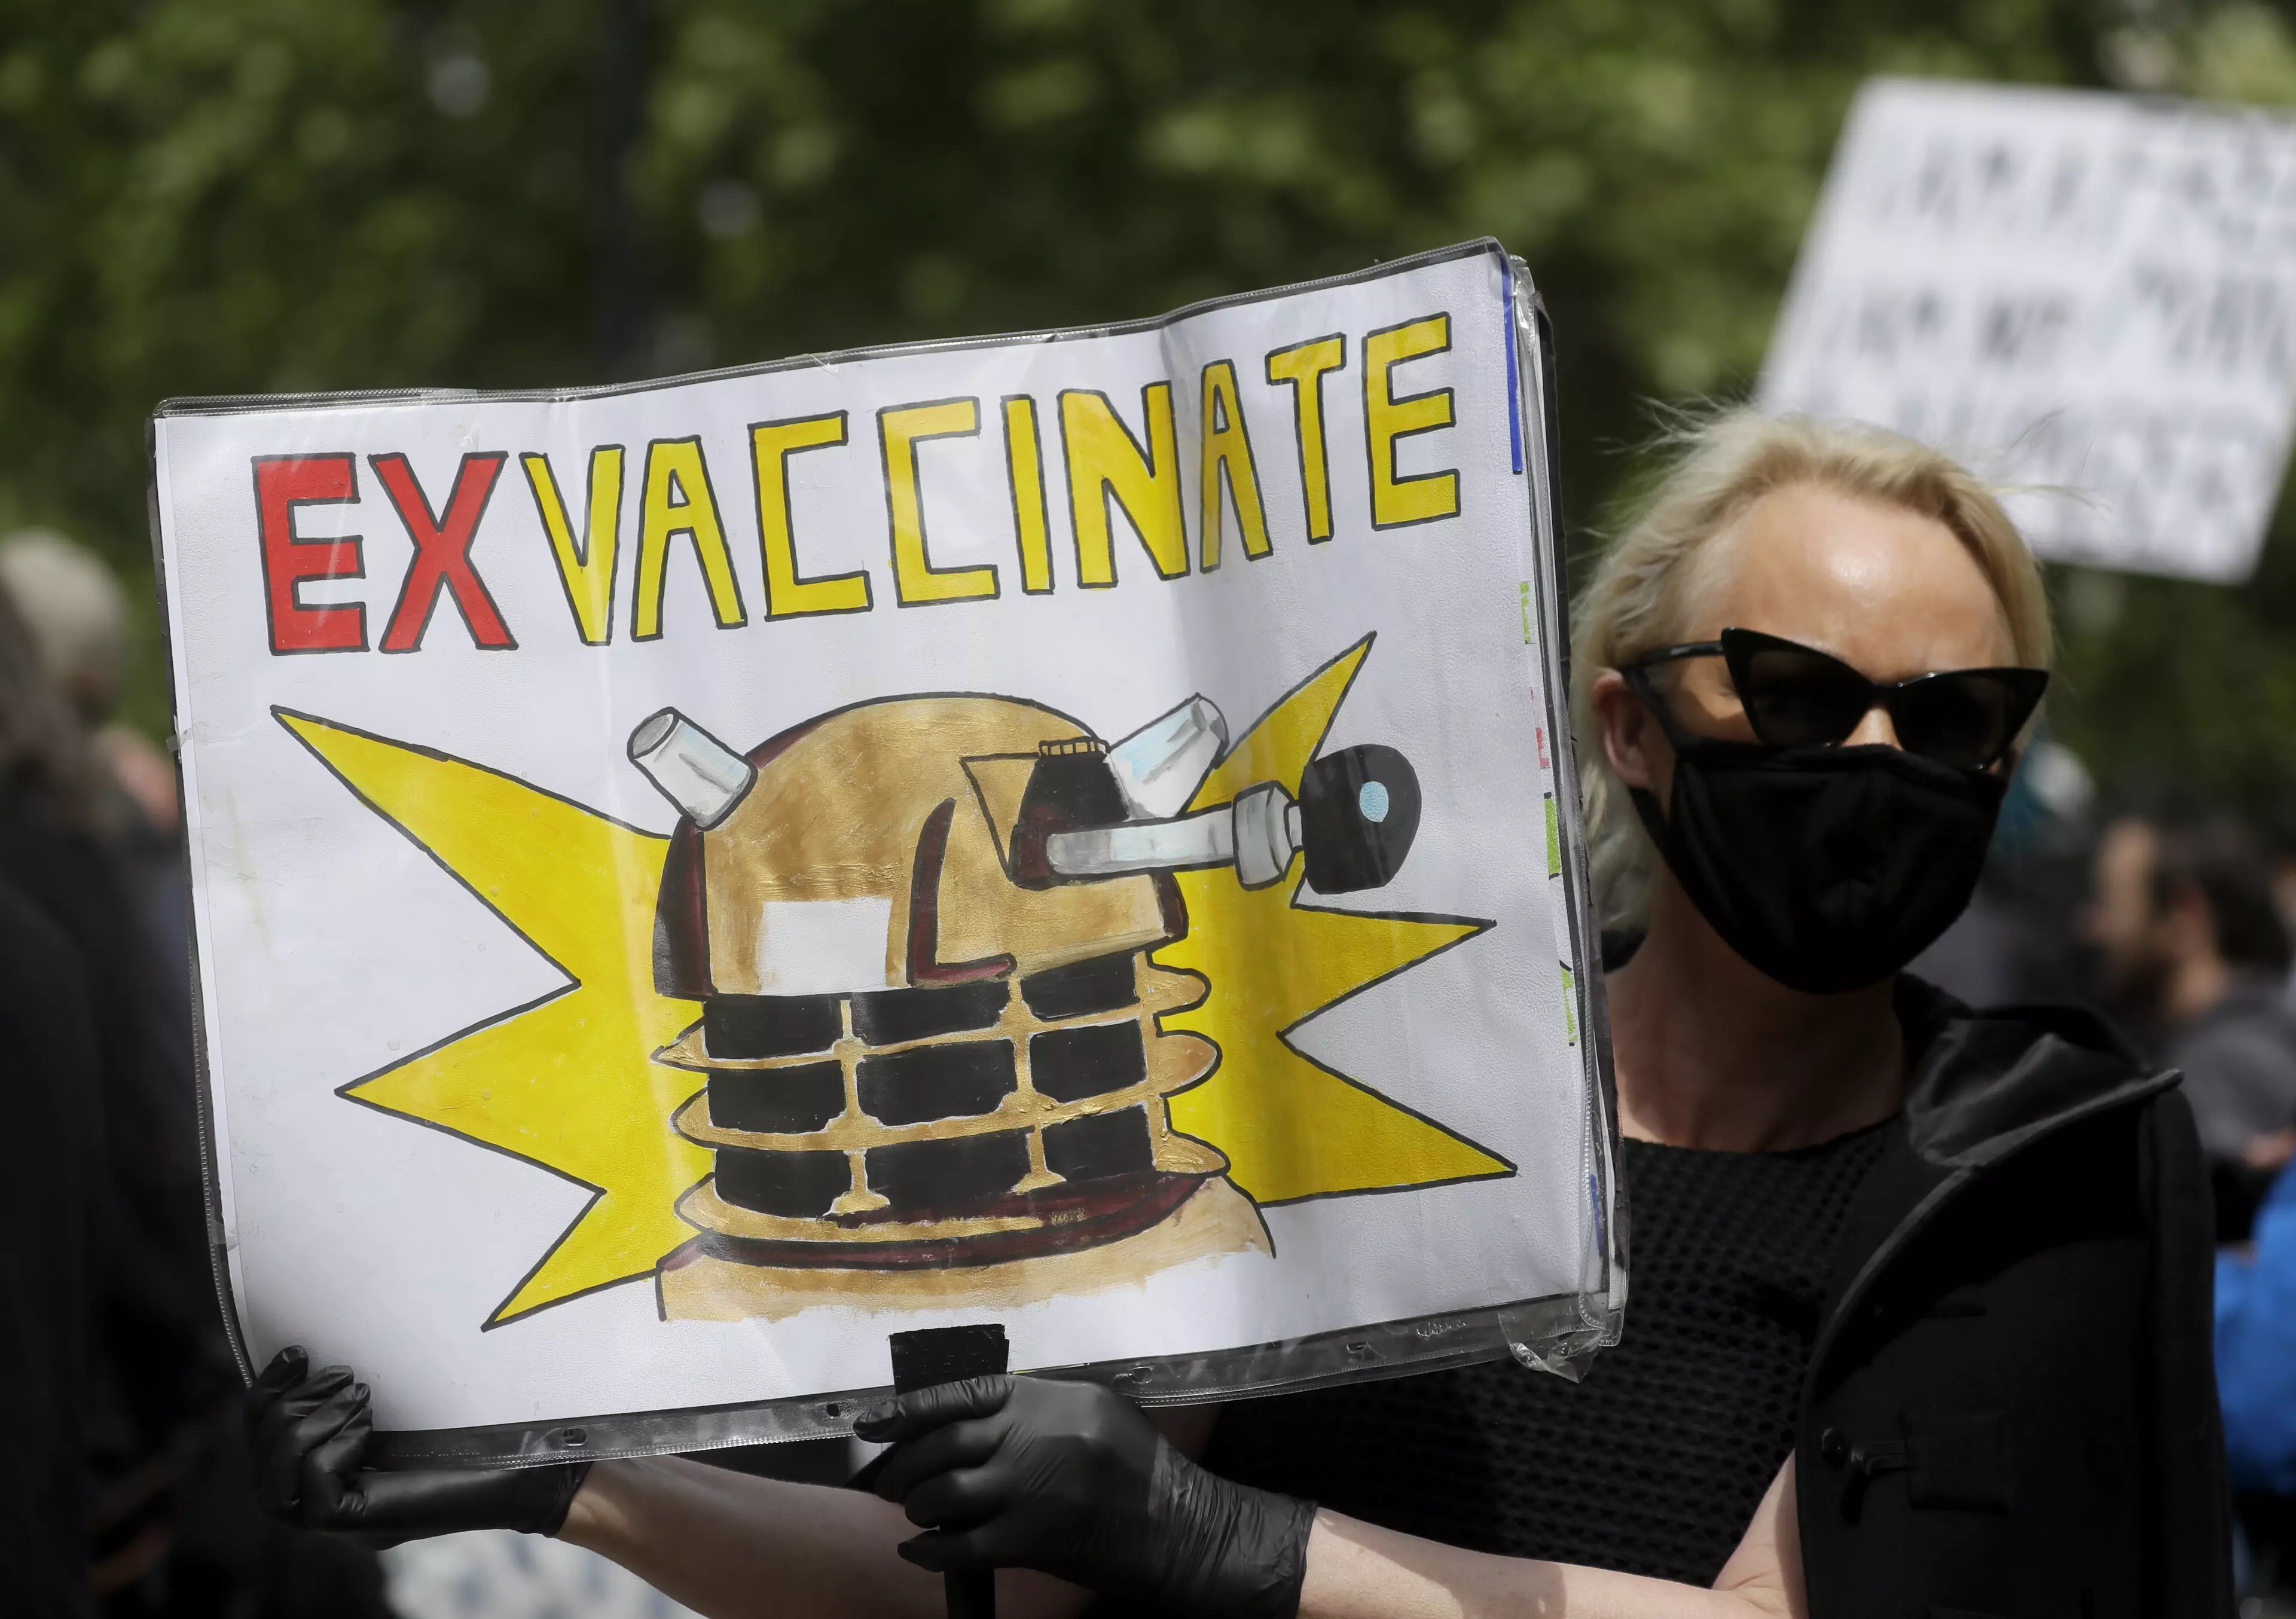 Some of the protesters carried anti-vaccination placards.